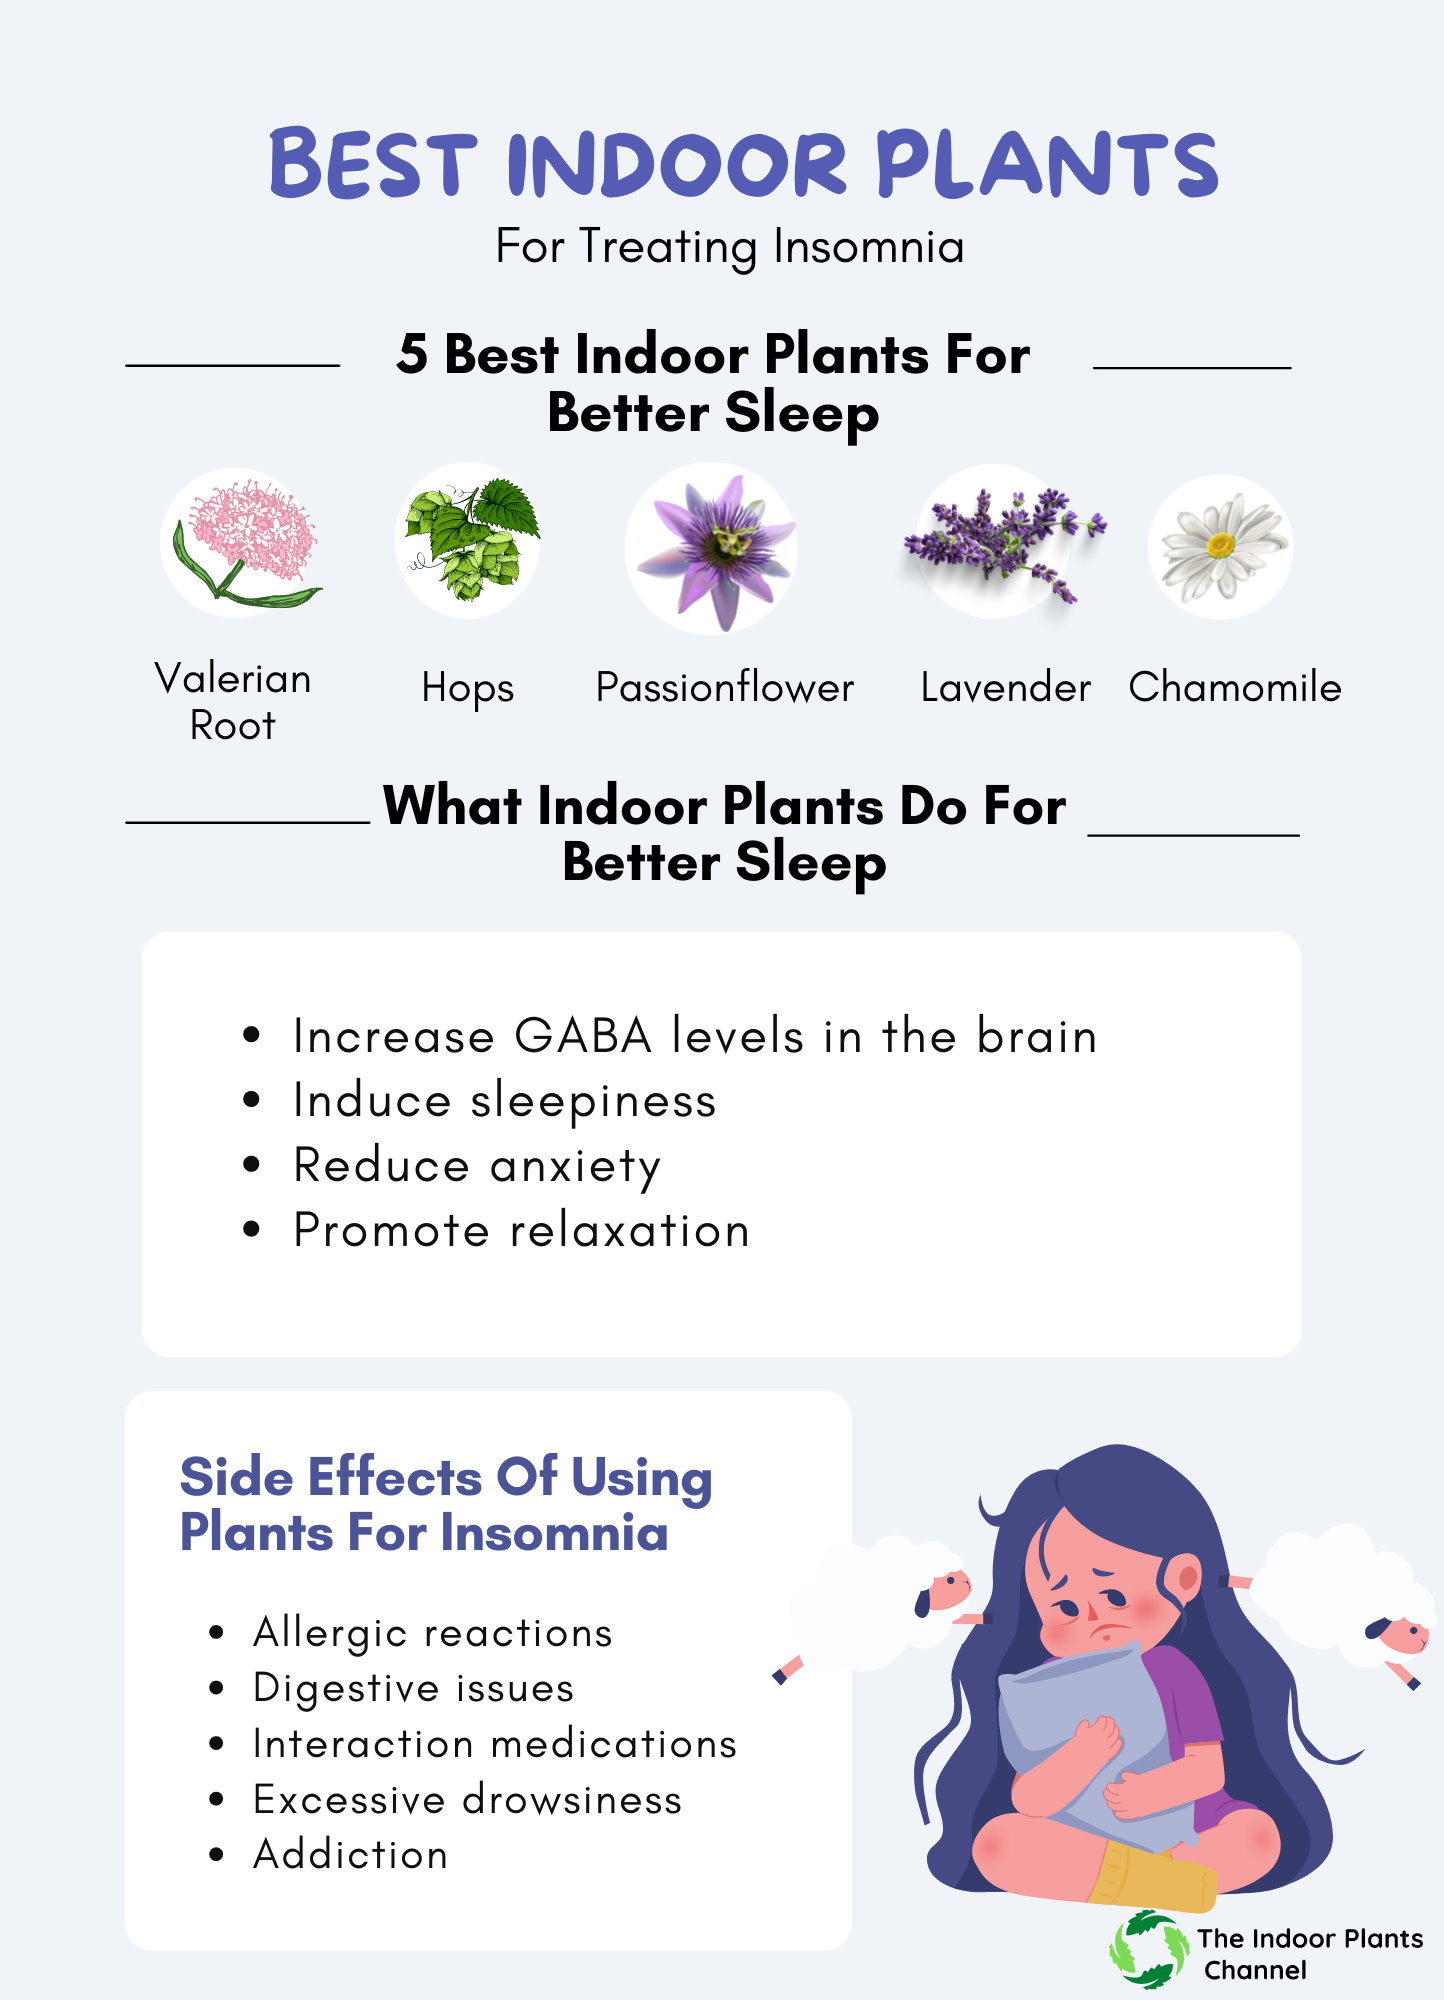 The Best Plants For Treating Insomnia